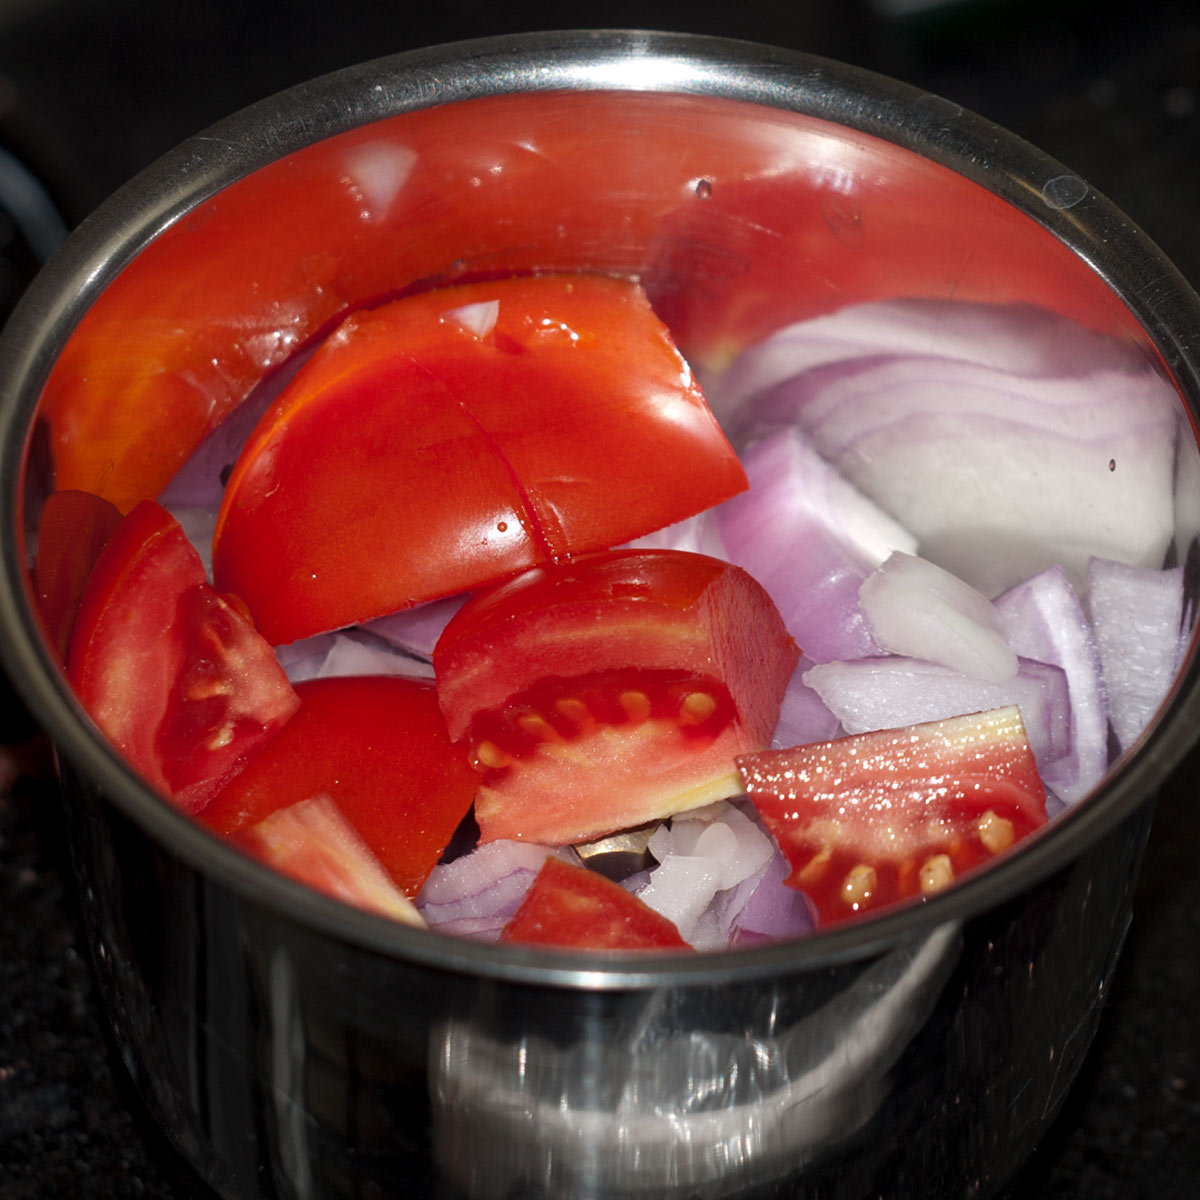 tomato and onion in a food processor jar